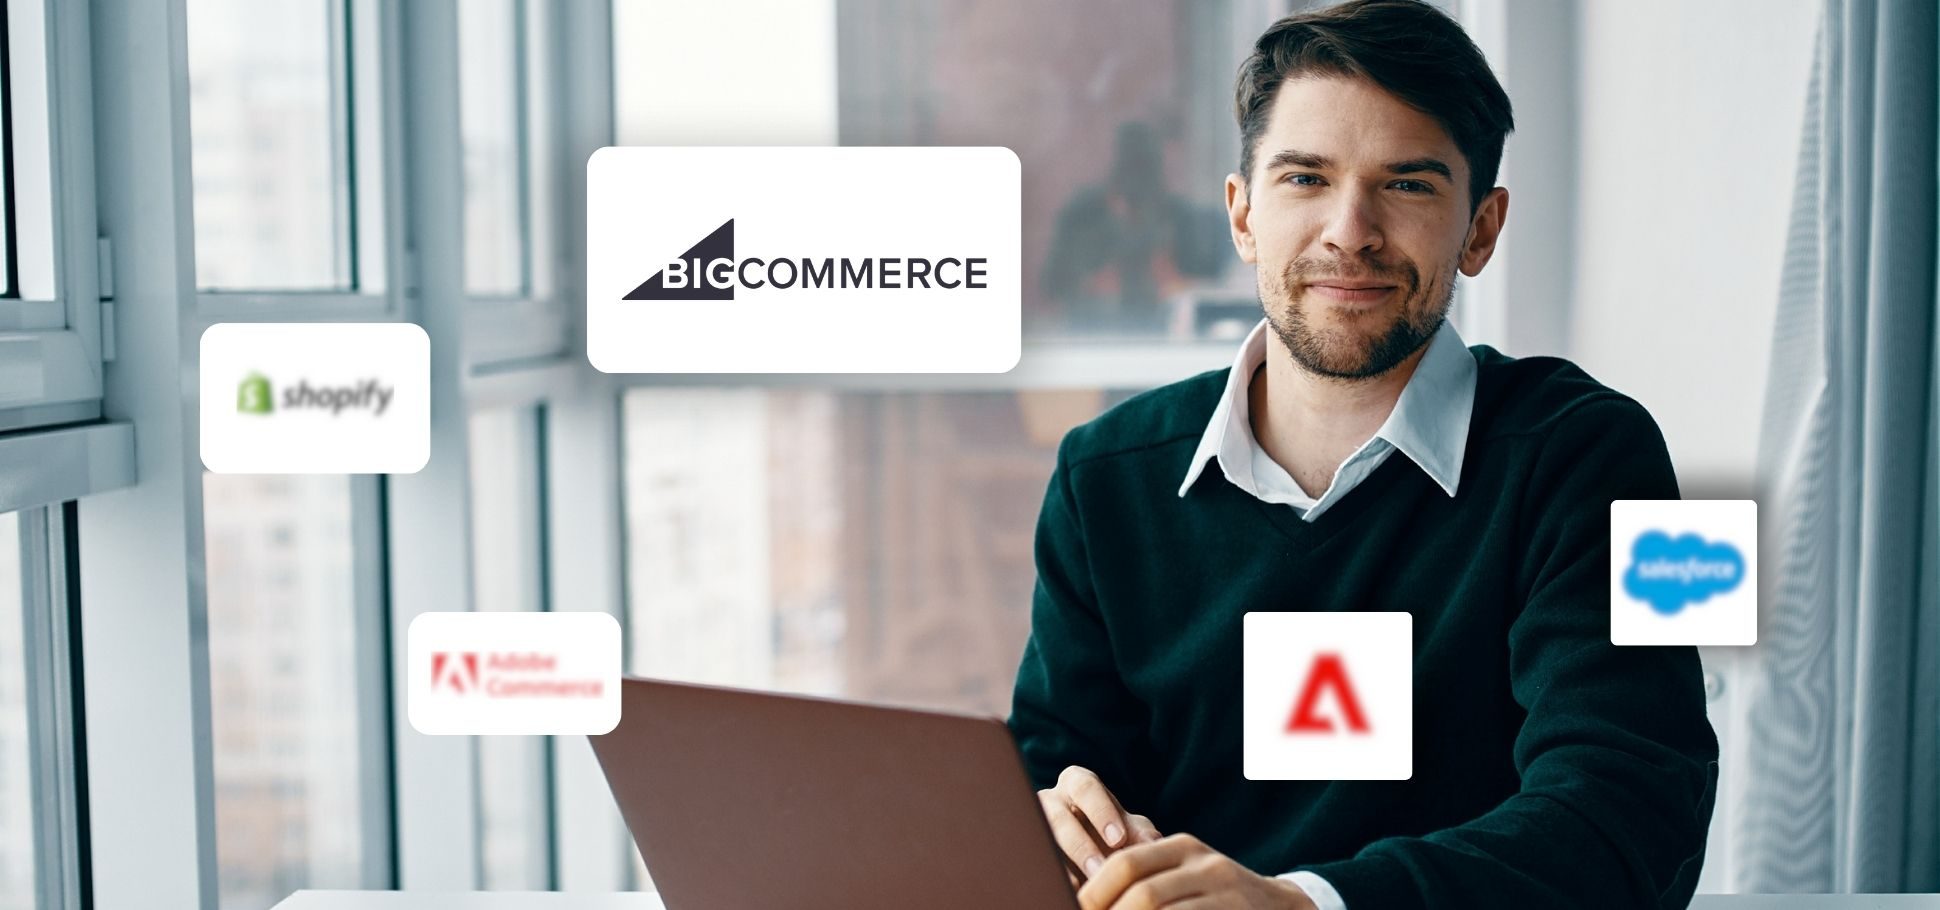 Man trying to choose between leading B2B e-commerce platforms